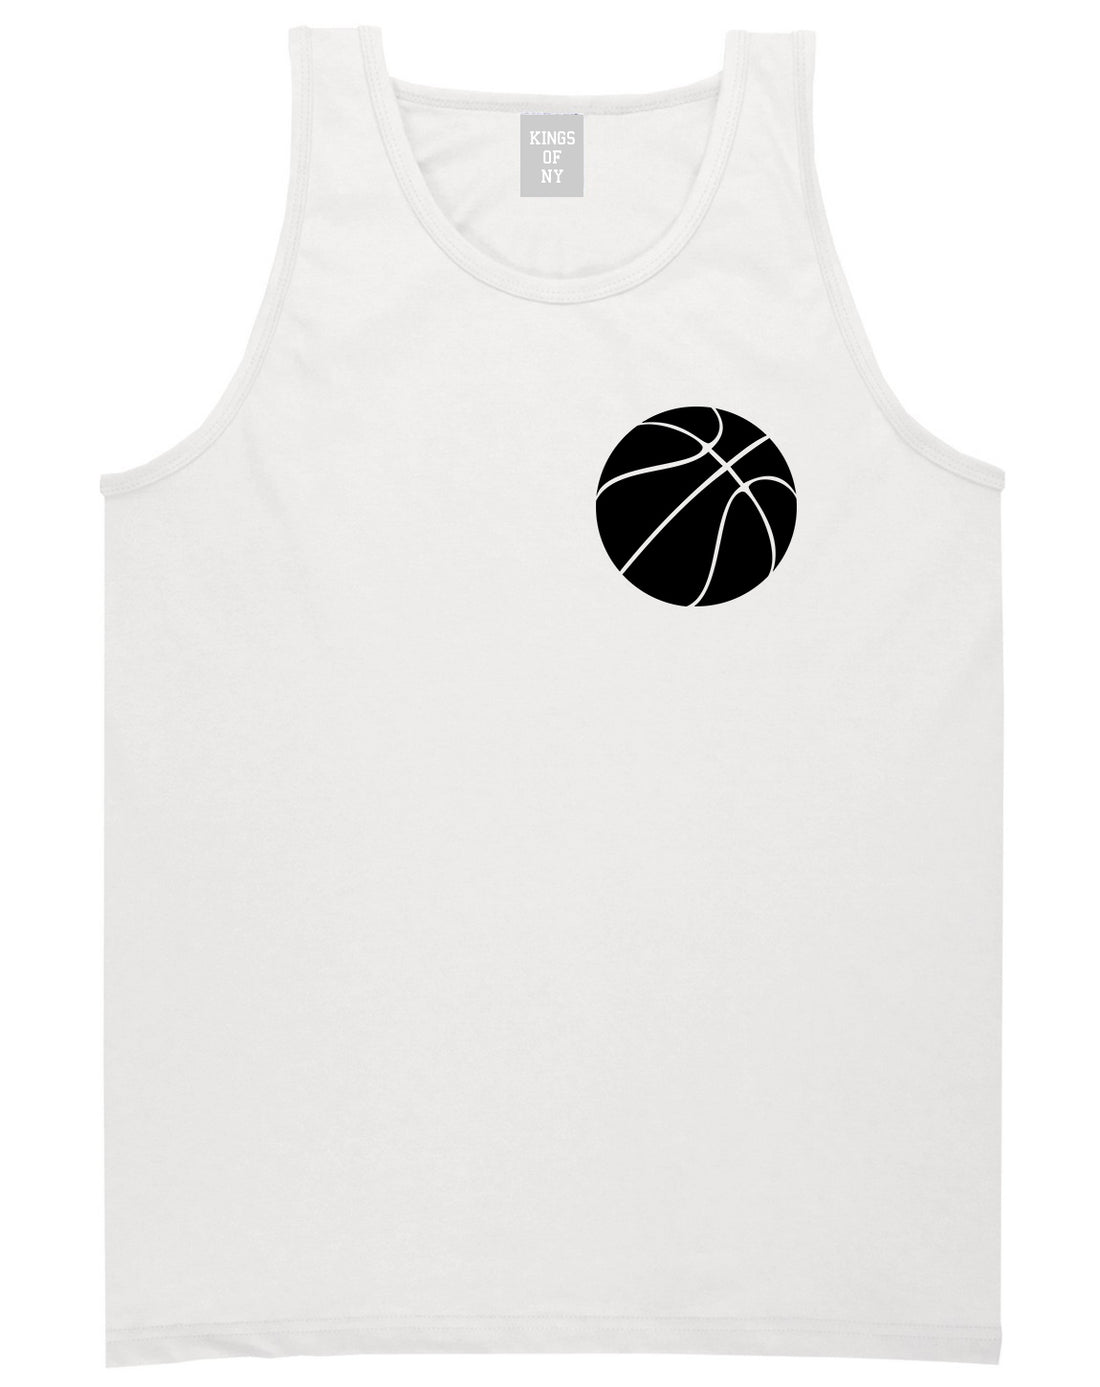 Basketball Logo Chest White Tank Top Shirt by Kings Of NY